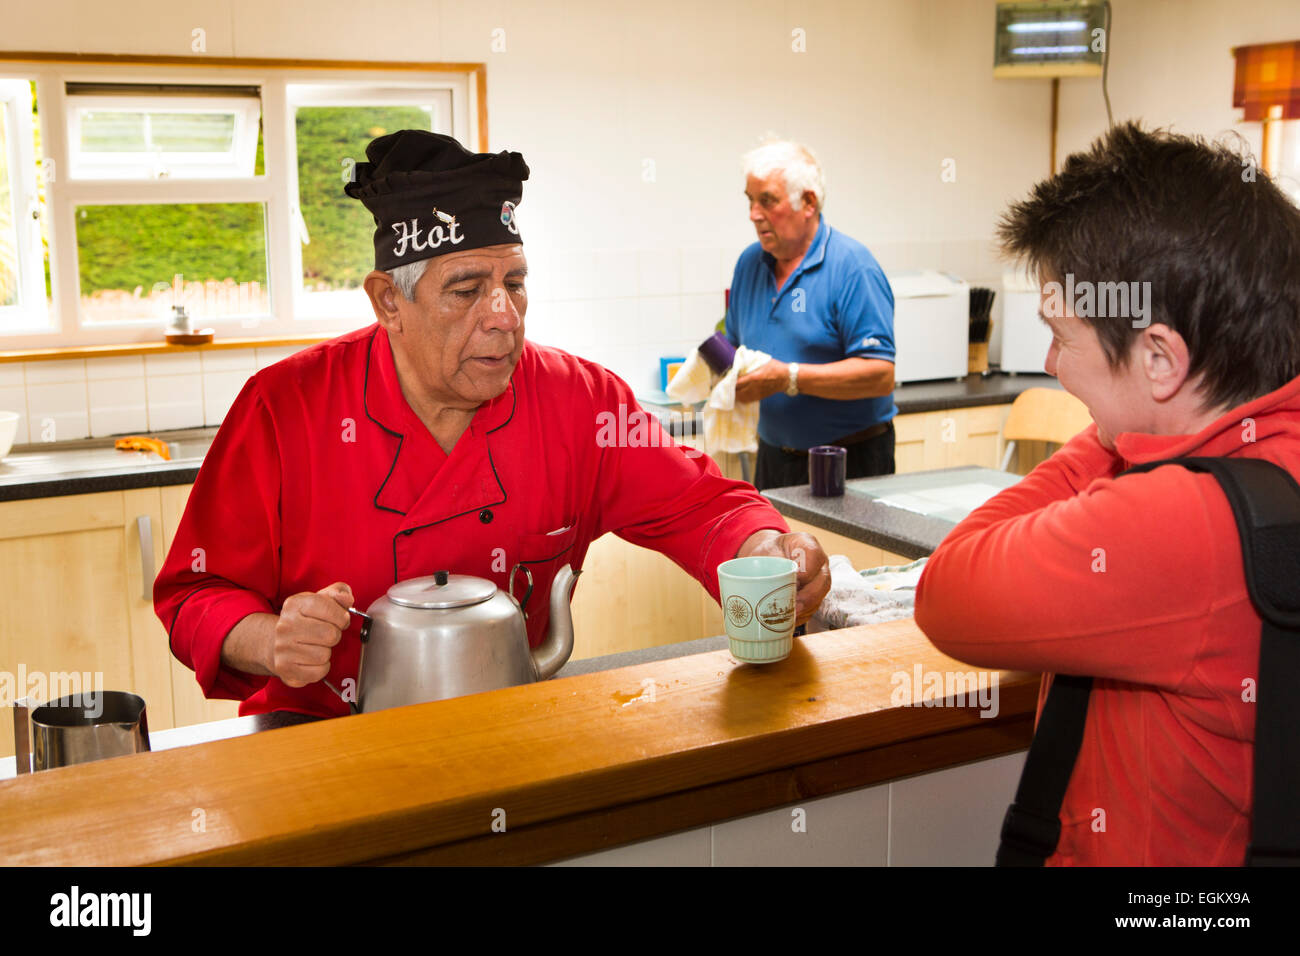 South Atlantic, Falklands, Carcass Island, McGill’s house, visitor being served cup of tea Stock Photo